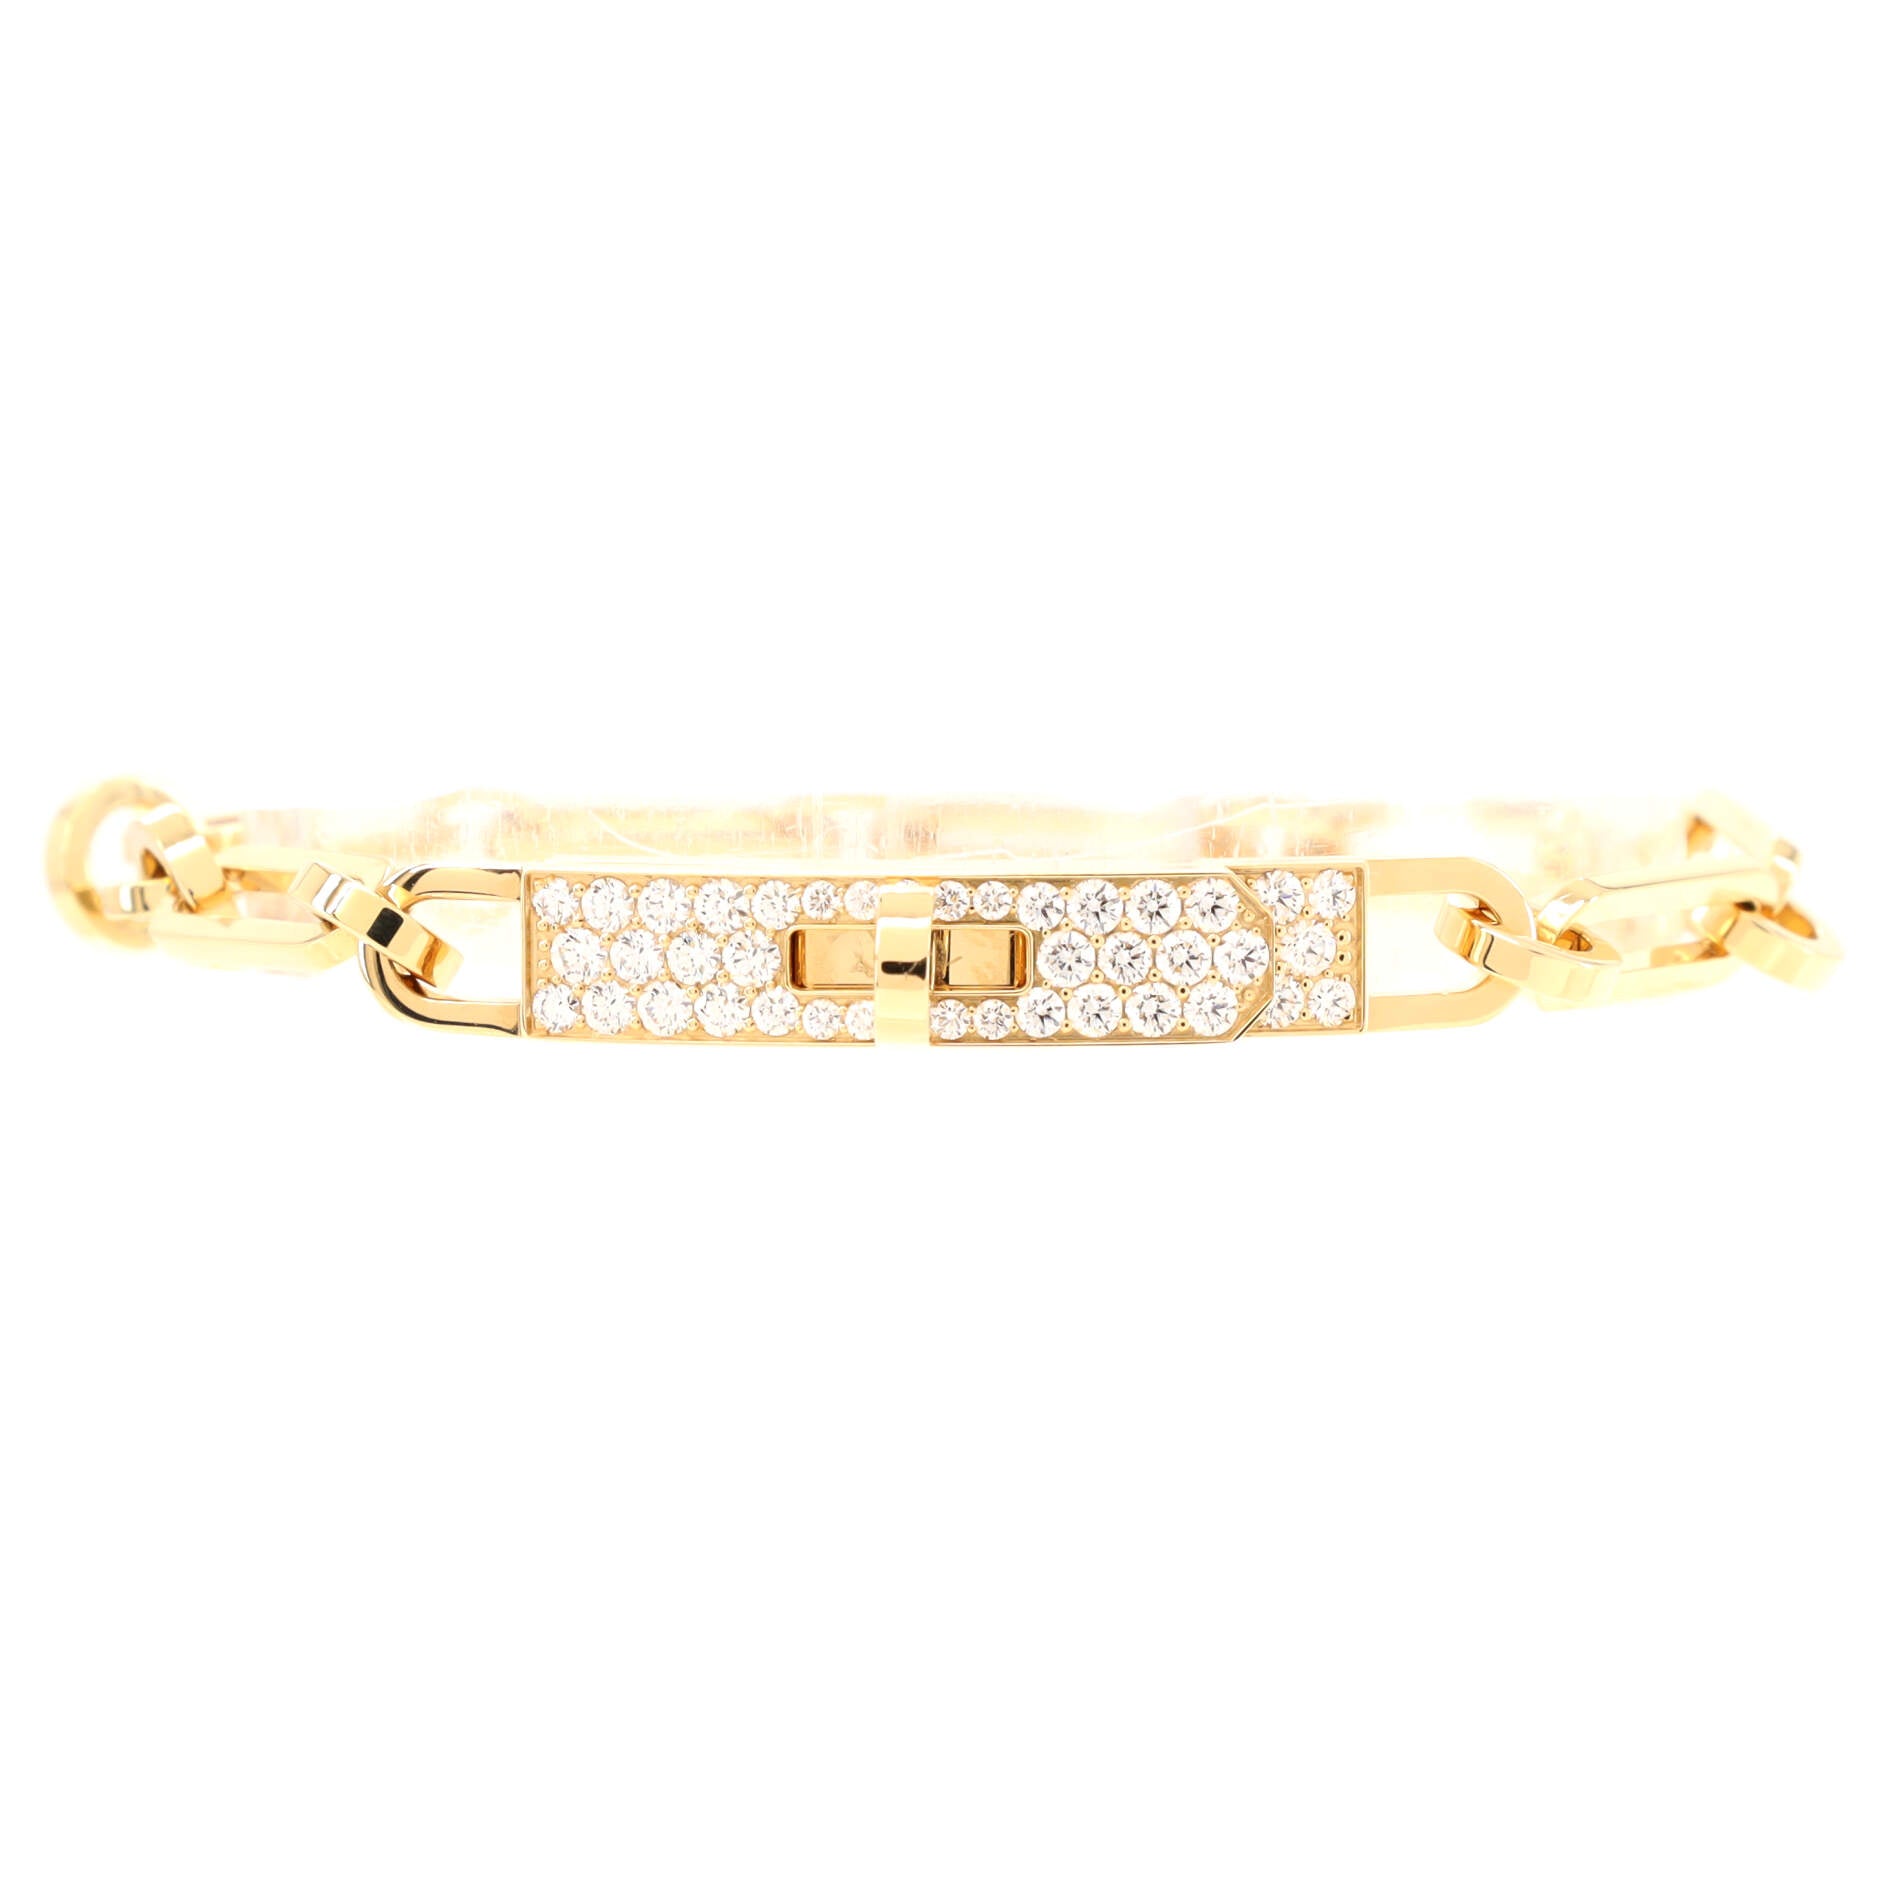 Hermes Kelly Gourmette Bracelet 18K White Gold and Pave Diamonds Extra  Small - 